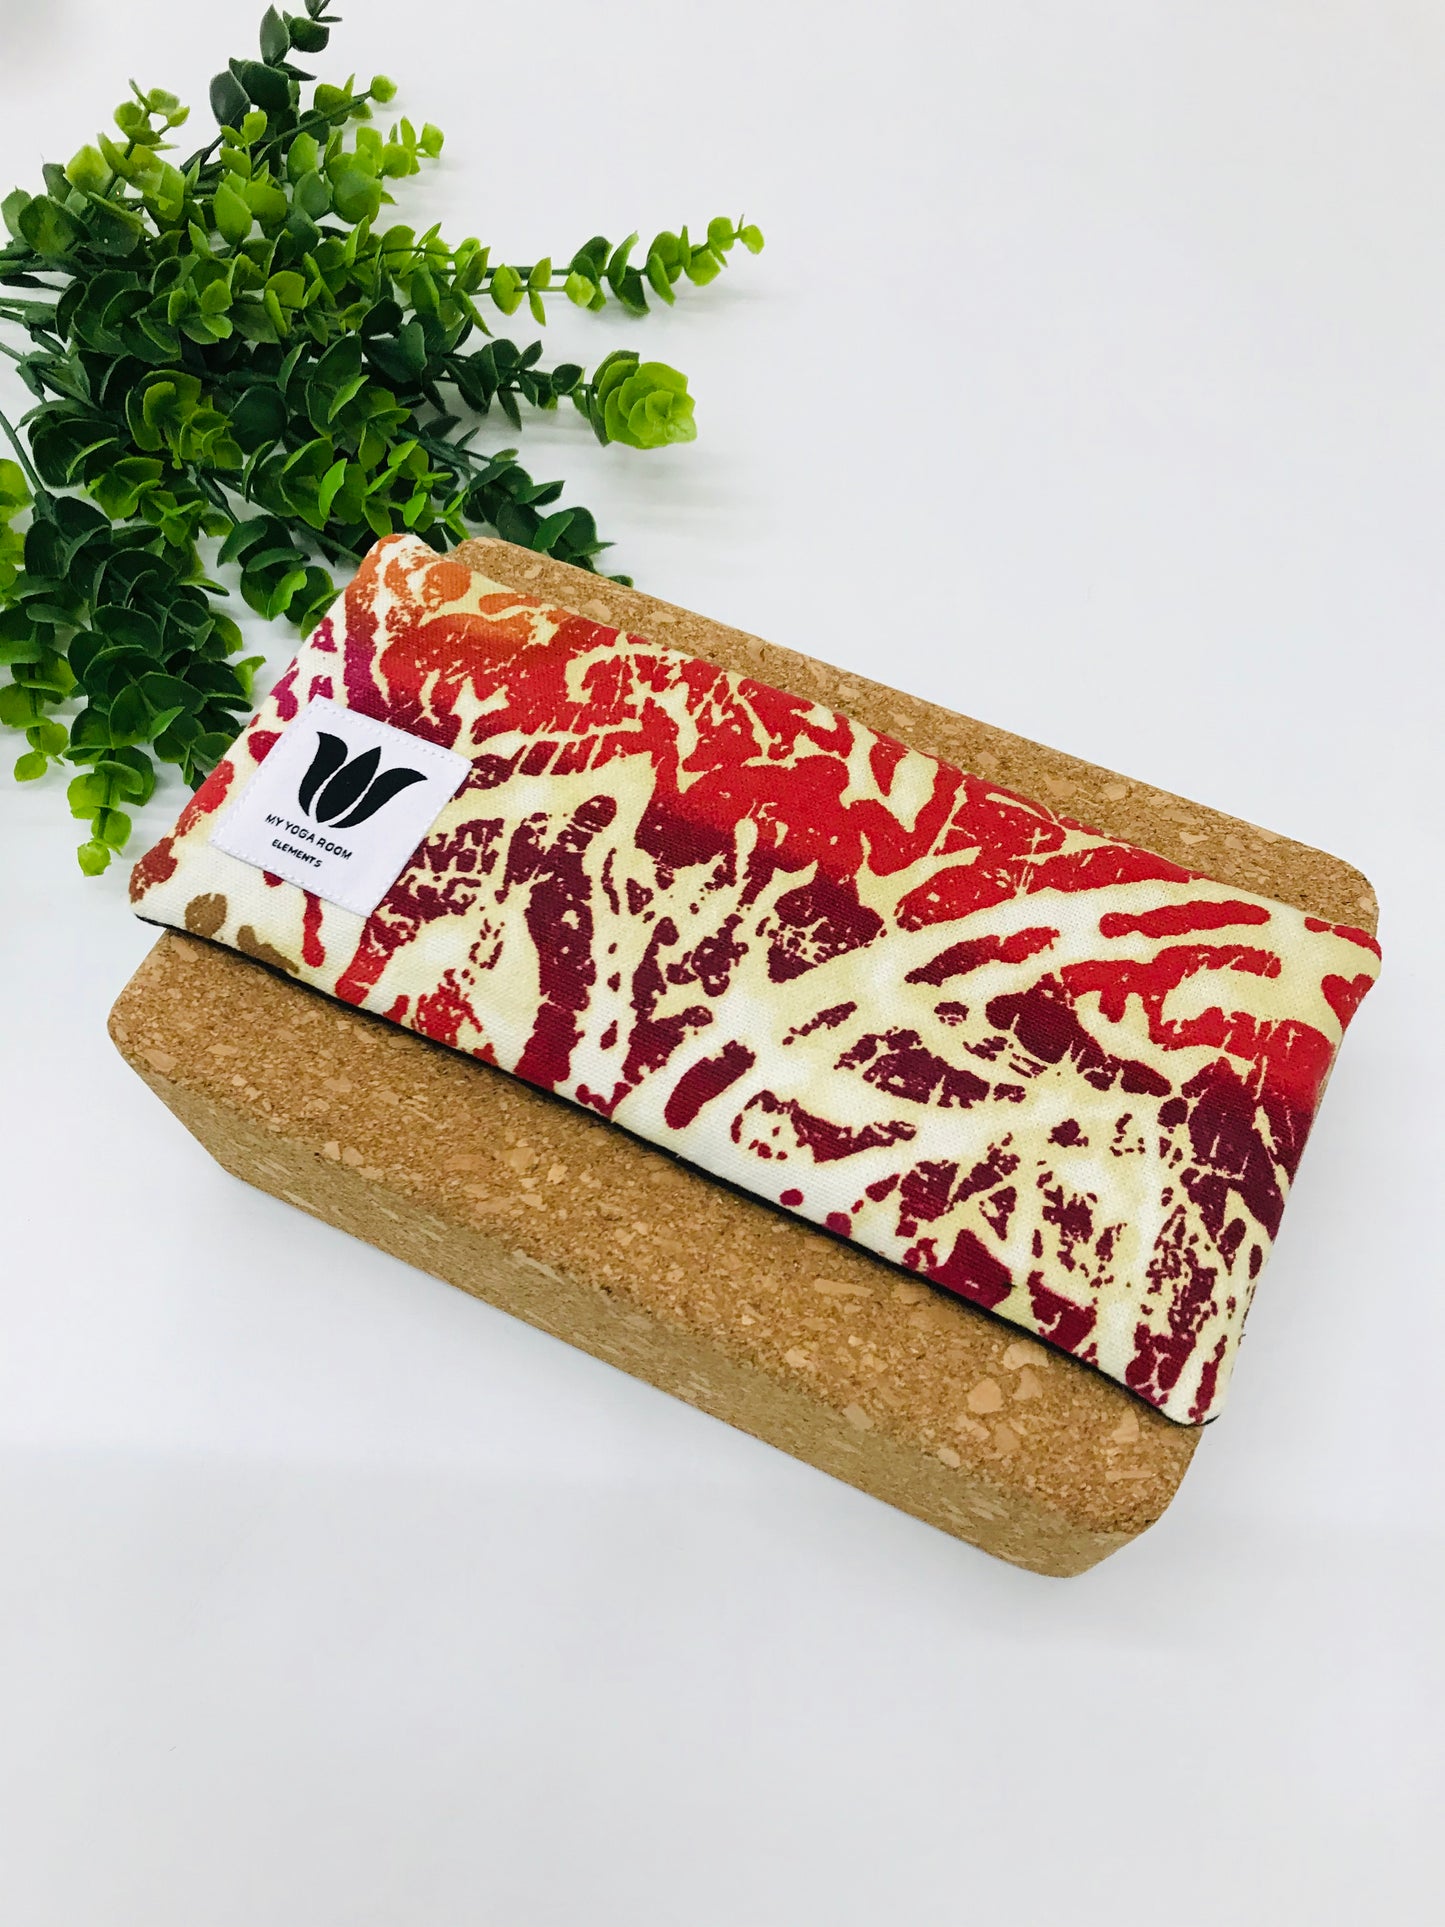 Yoga eye pillow, unscented, therapeutically weighted to soothe eye strain and stress or enhance your savasana. Handcrafted in Canada by My Yoga Room Elements. Orange/pink/purple modern print and bamboo fabric.